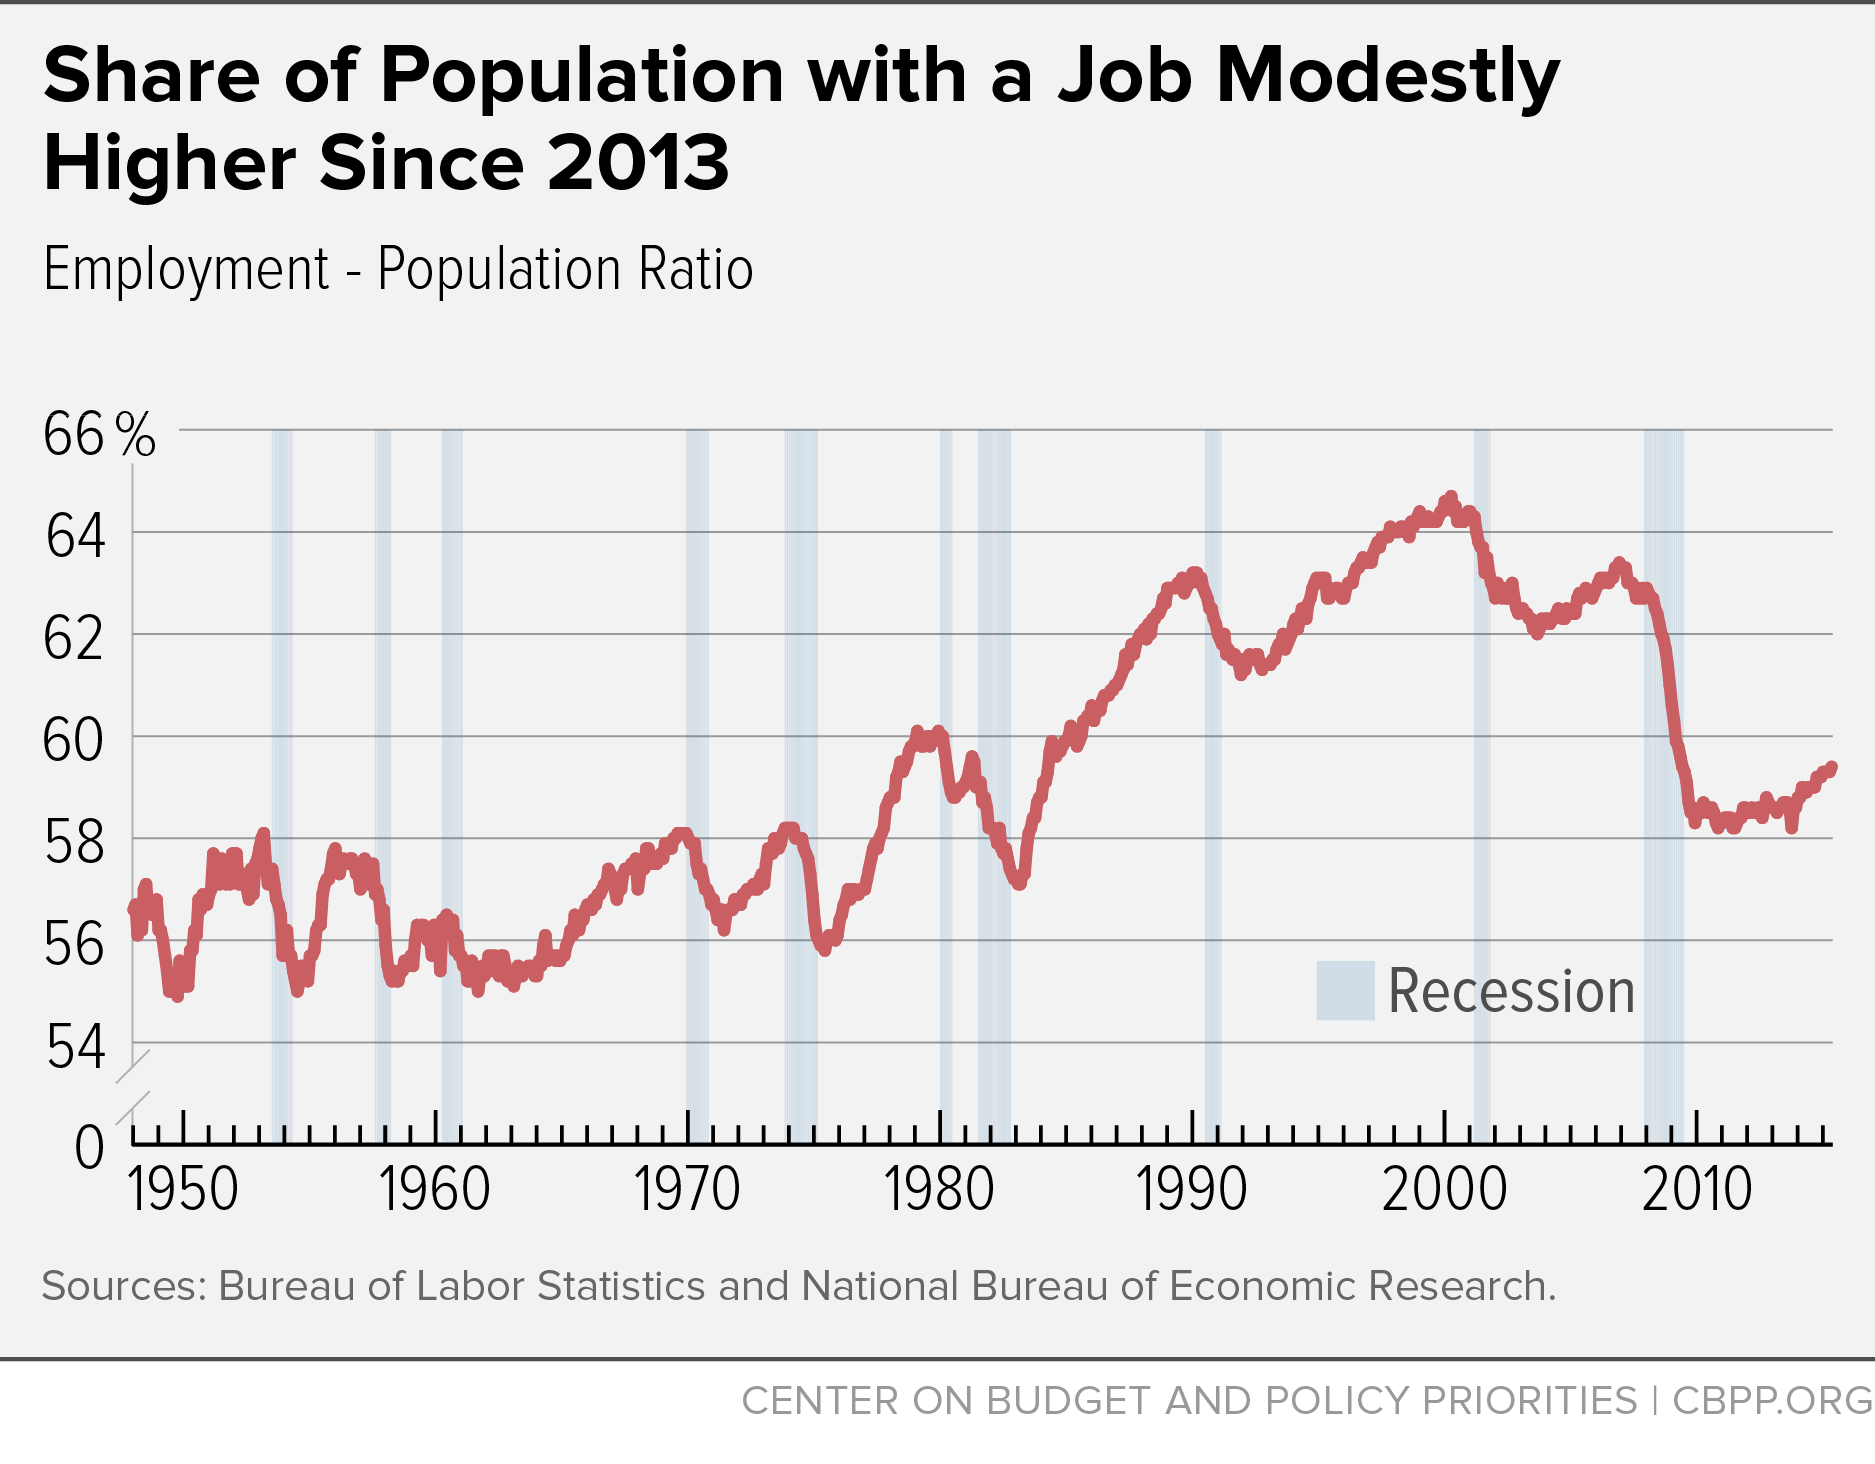 Share of Population with a Job Modestly Higher Since 2013 (June 5, 2015)